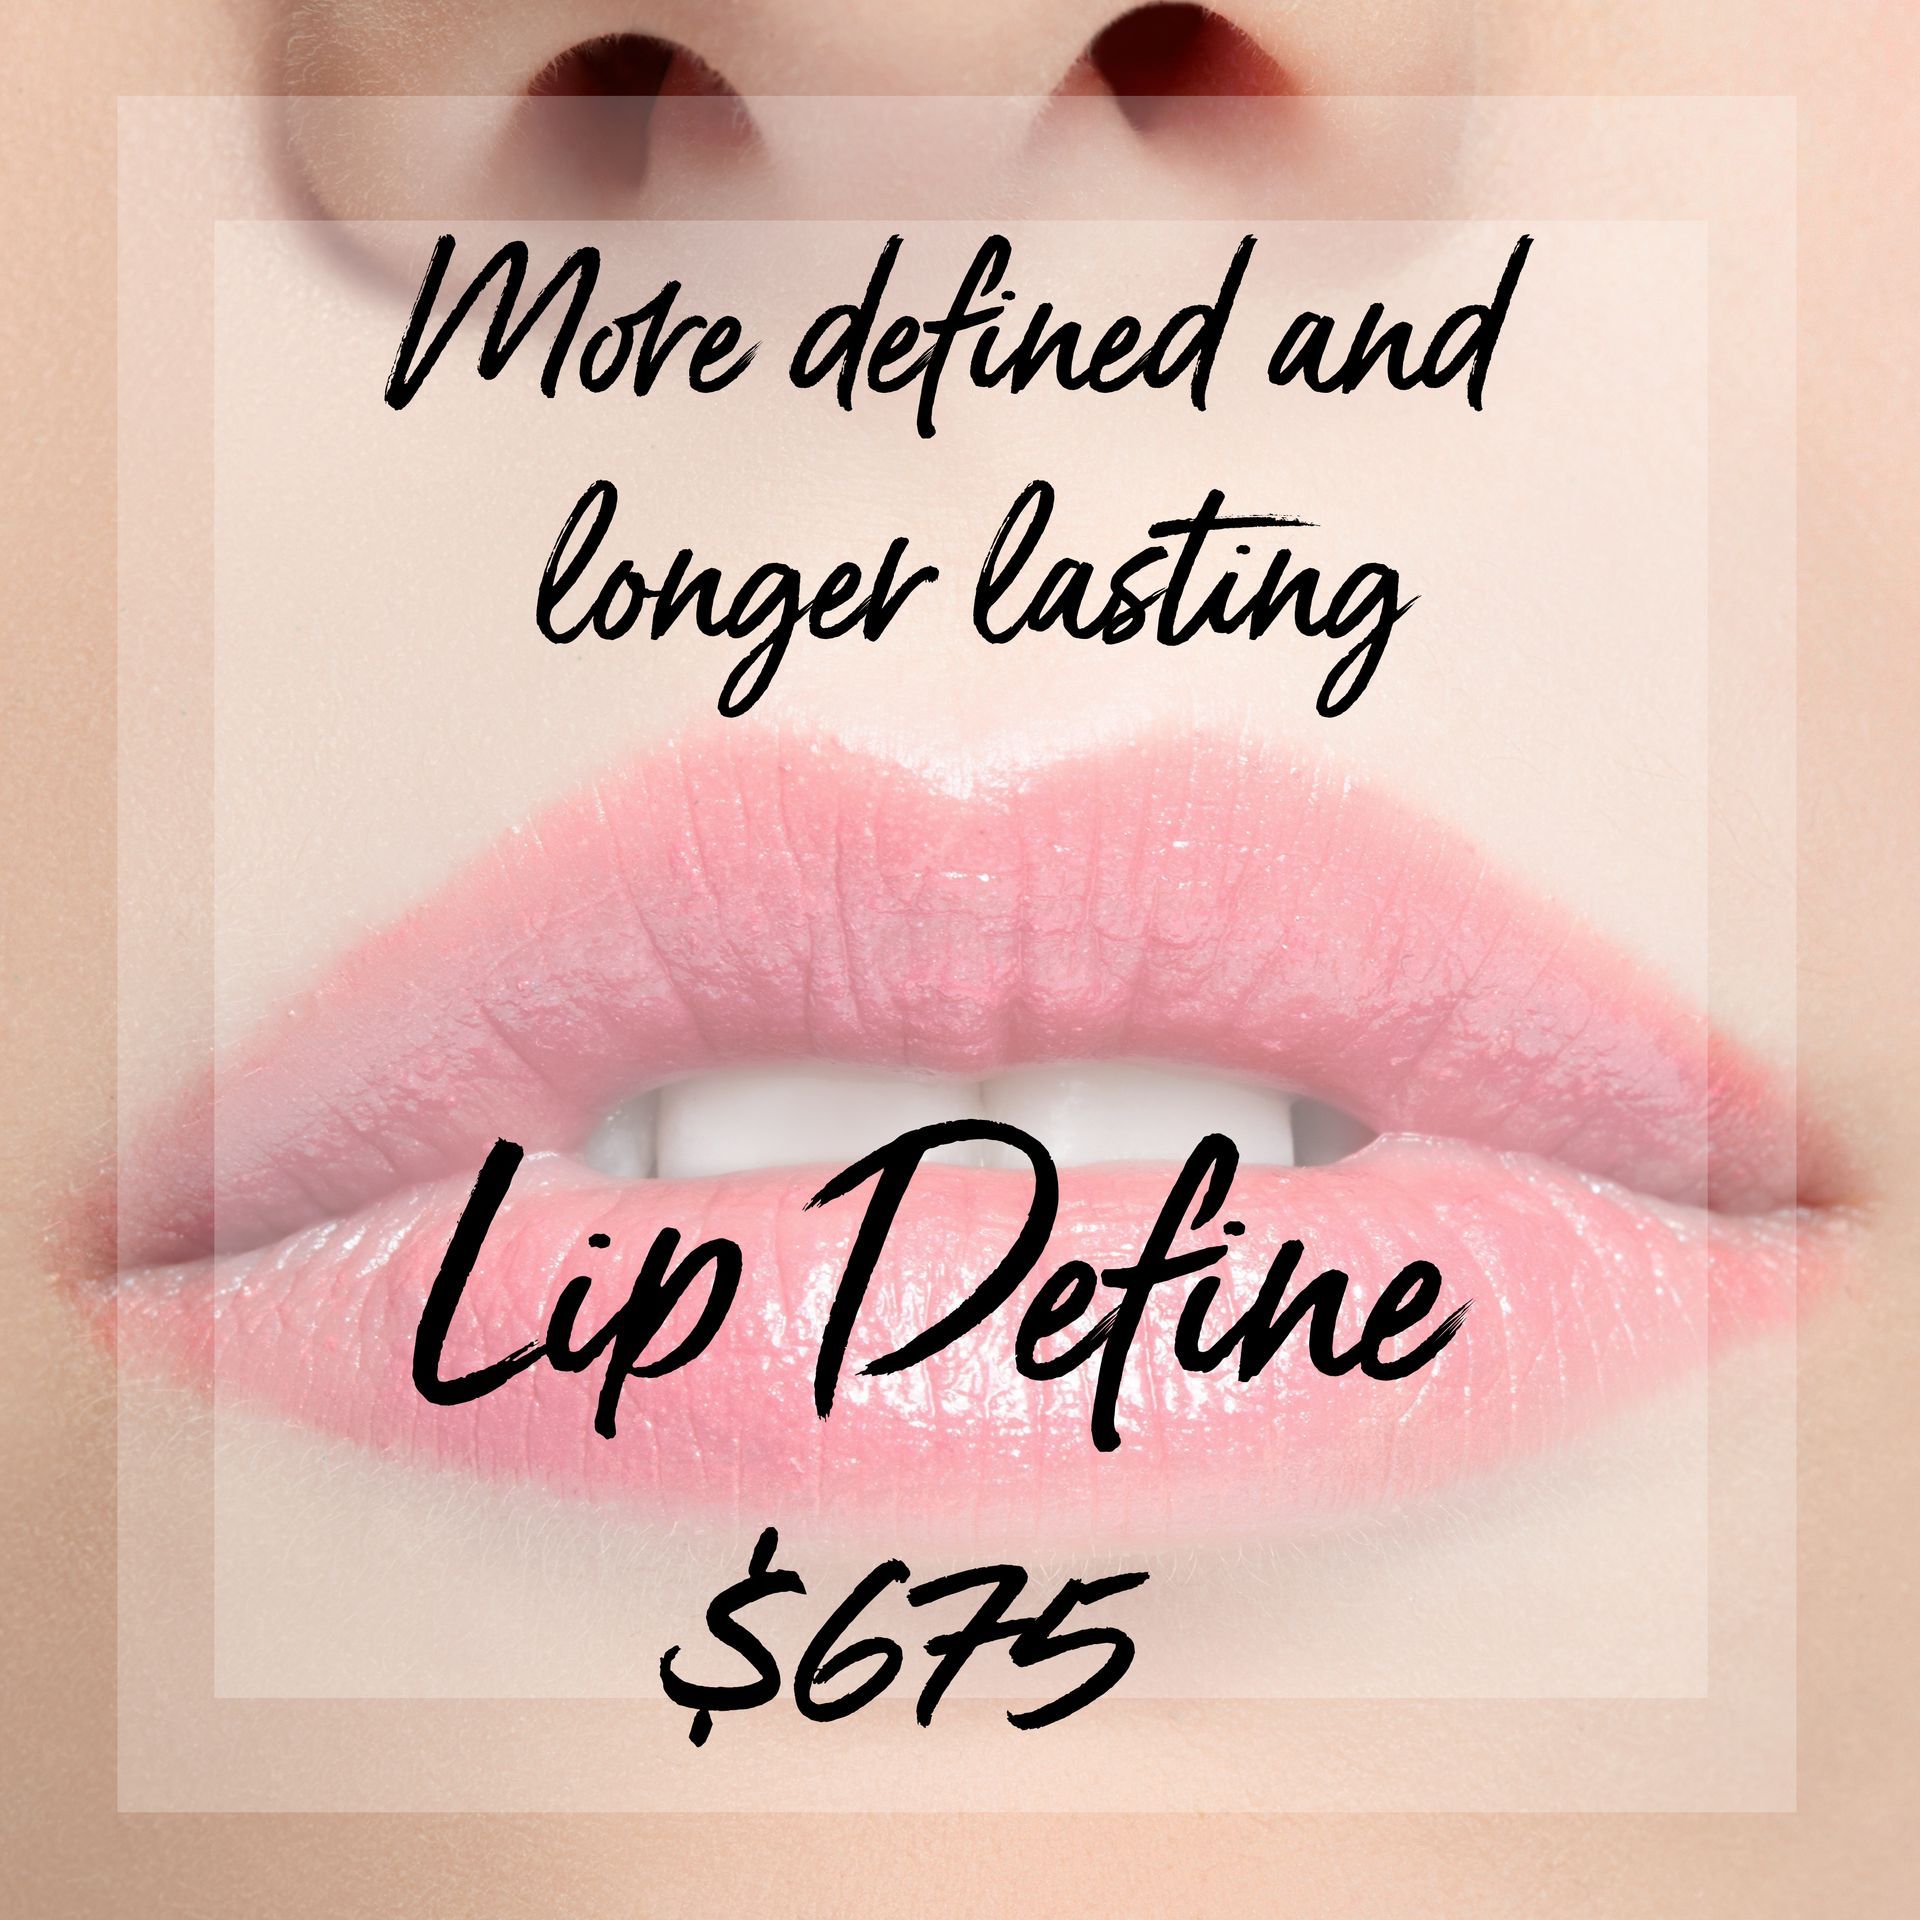 A close up of a woman 's lips with the words more defined and longer lasting lip define $ 675